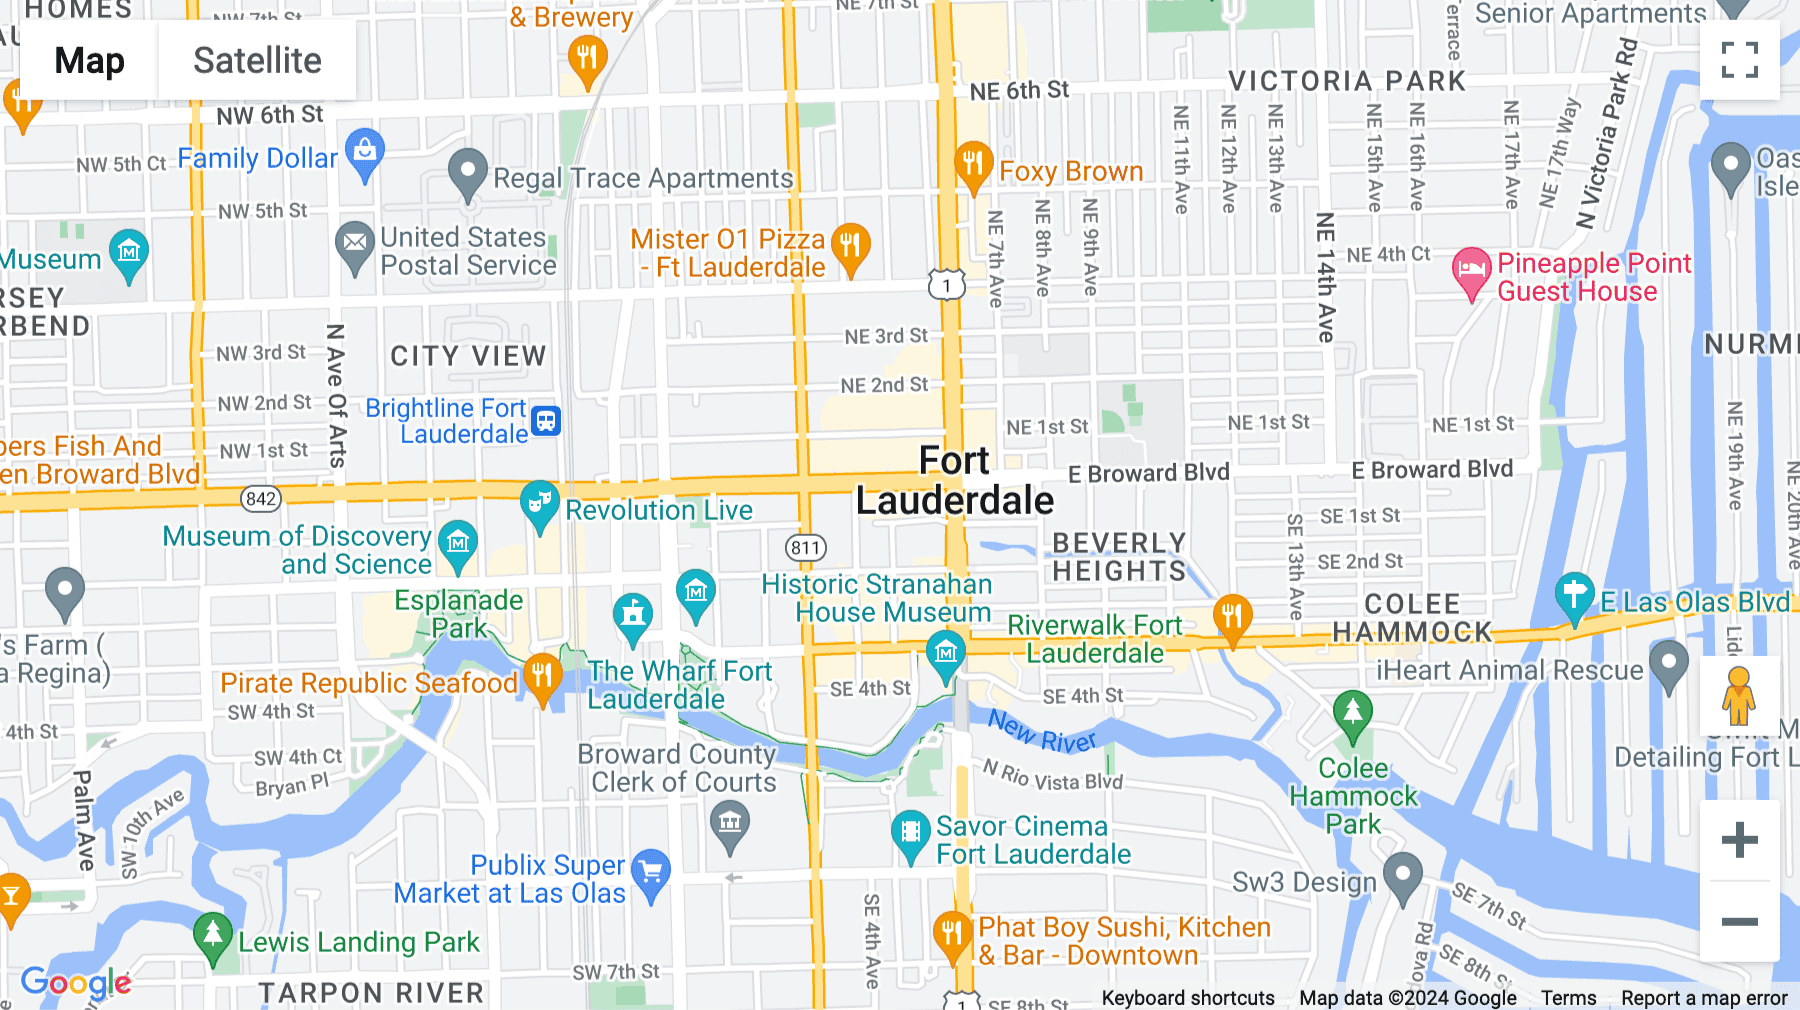 Click for interative map of 500 E Broward Boulevard, Suite 1710, Fort Lauderdale